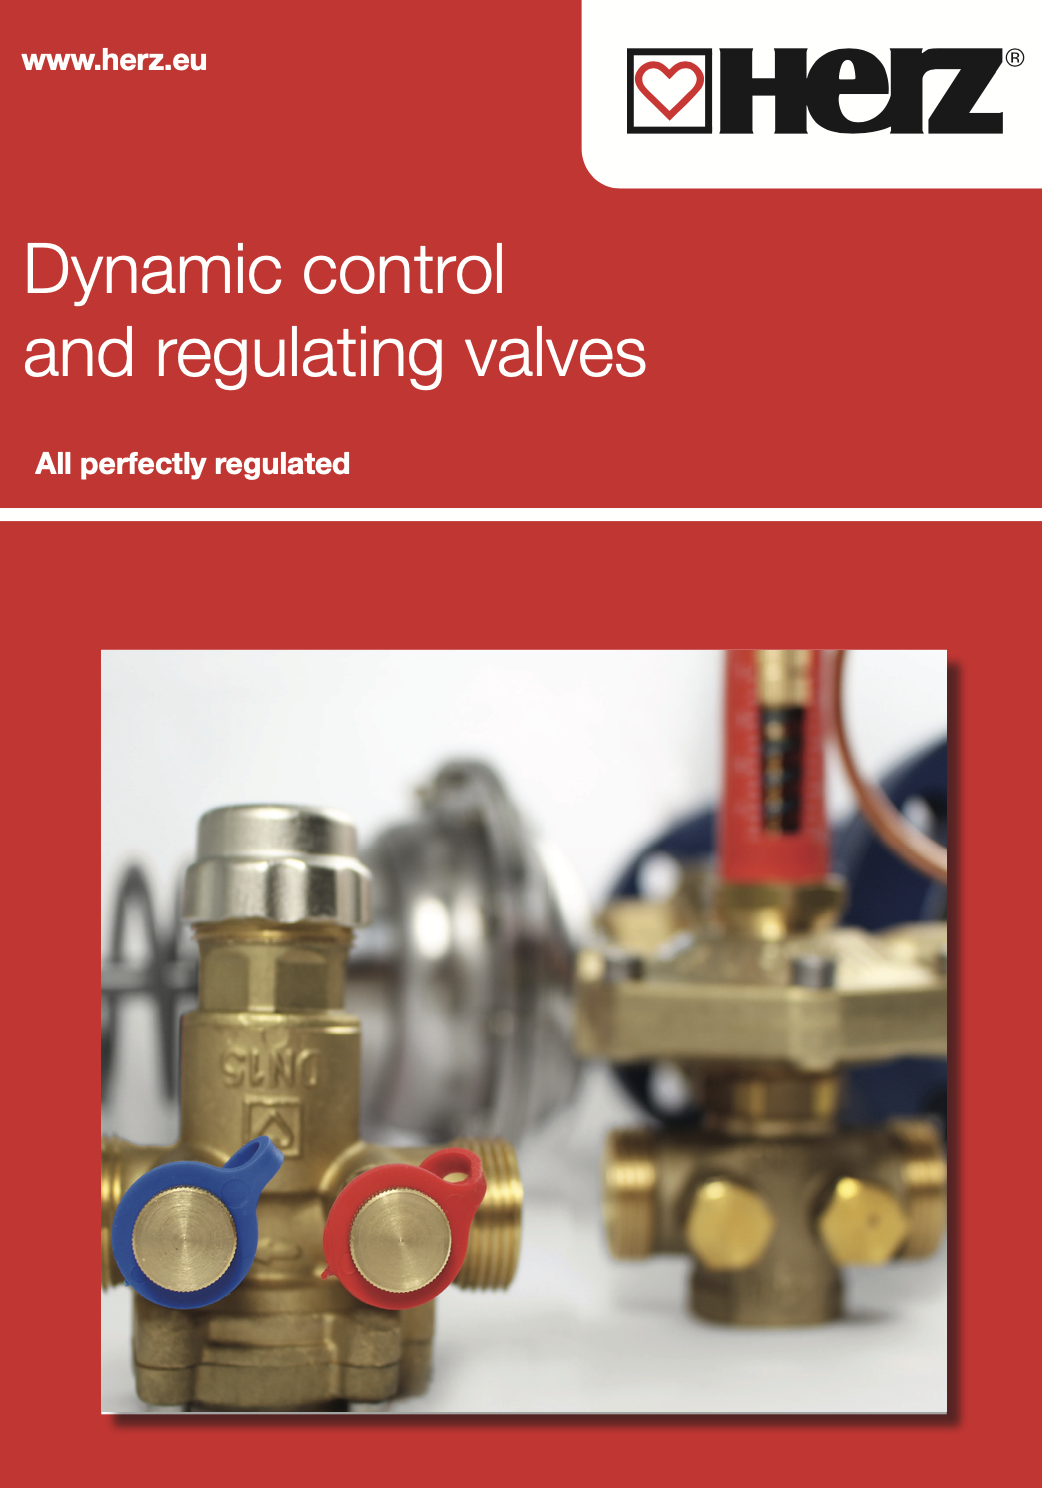 Dynamic control and regulating valves